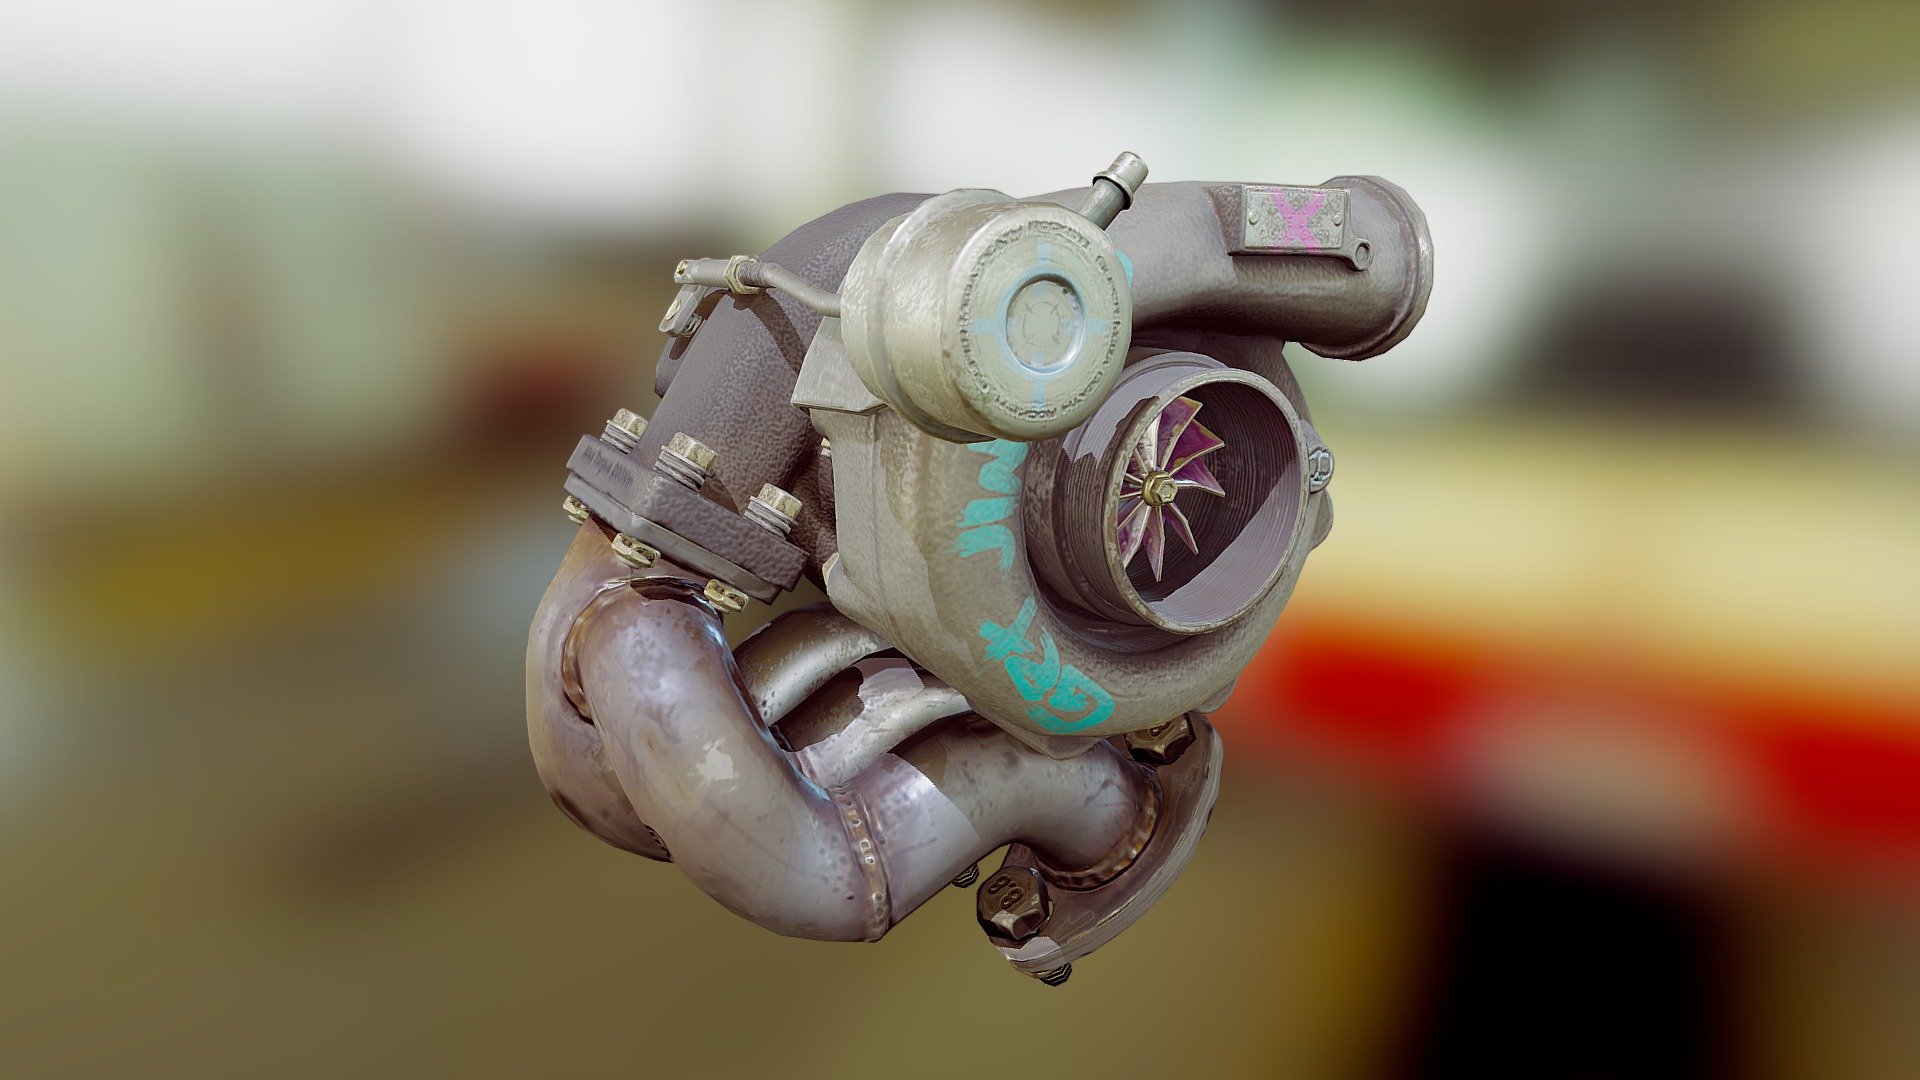 Personal project where I wanted to model a turbo using mix of real life references and imagination. I also wanted to mix a little bit of LoL Jinx theme there as well 3d model